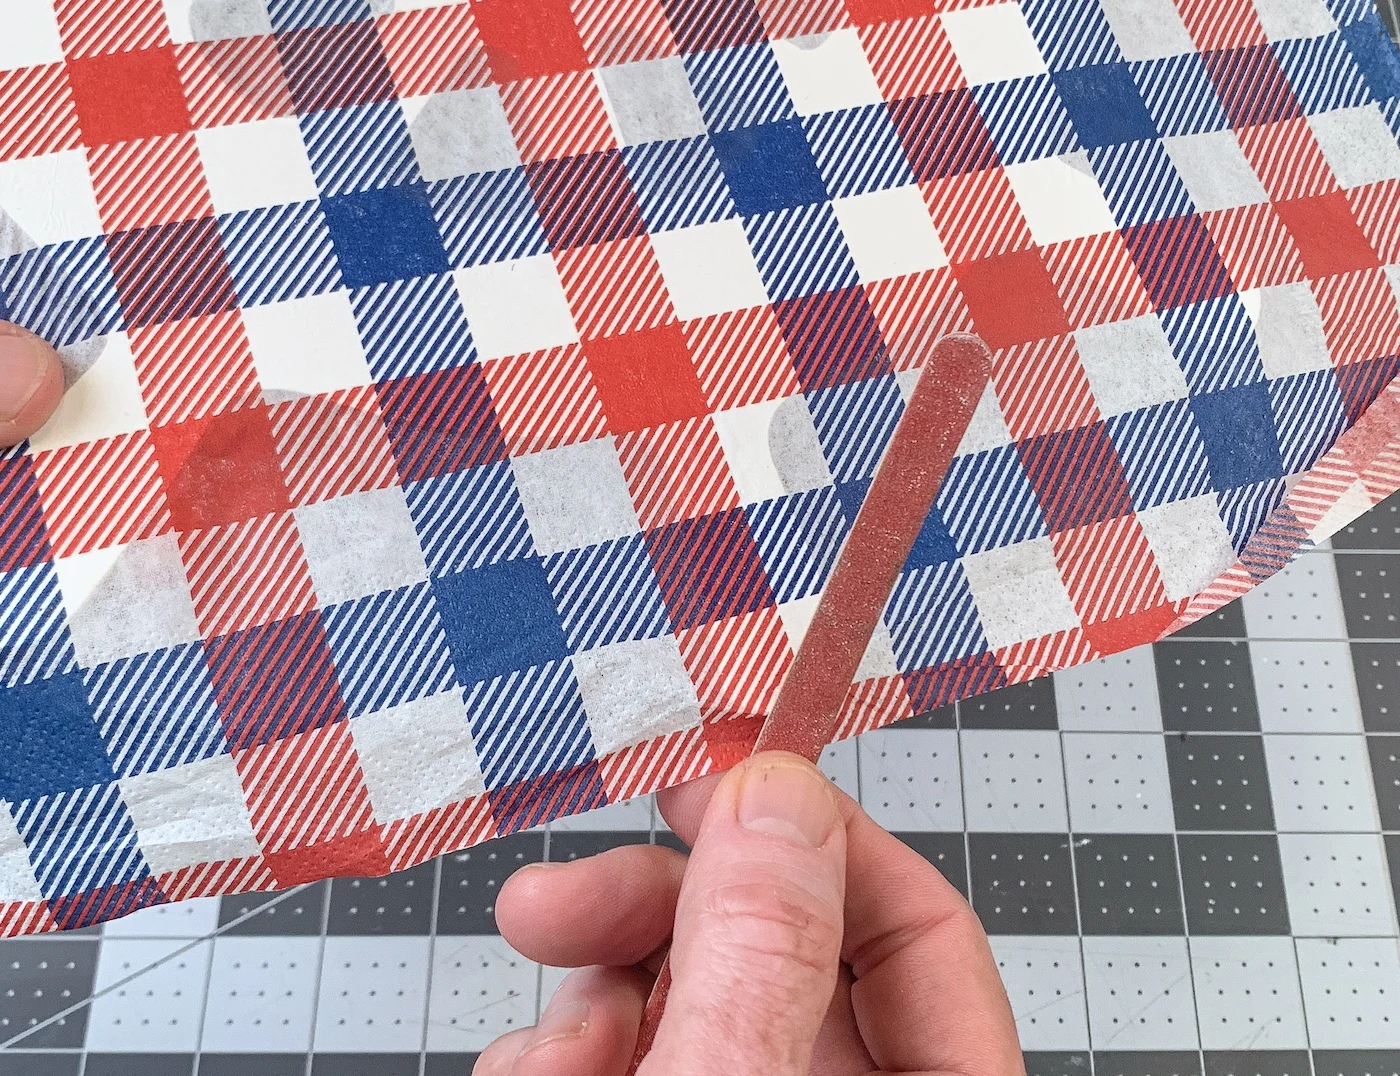 Sanding the red and blue napkin off with emery board